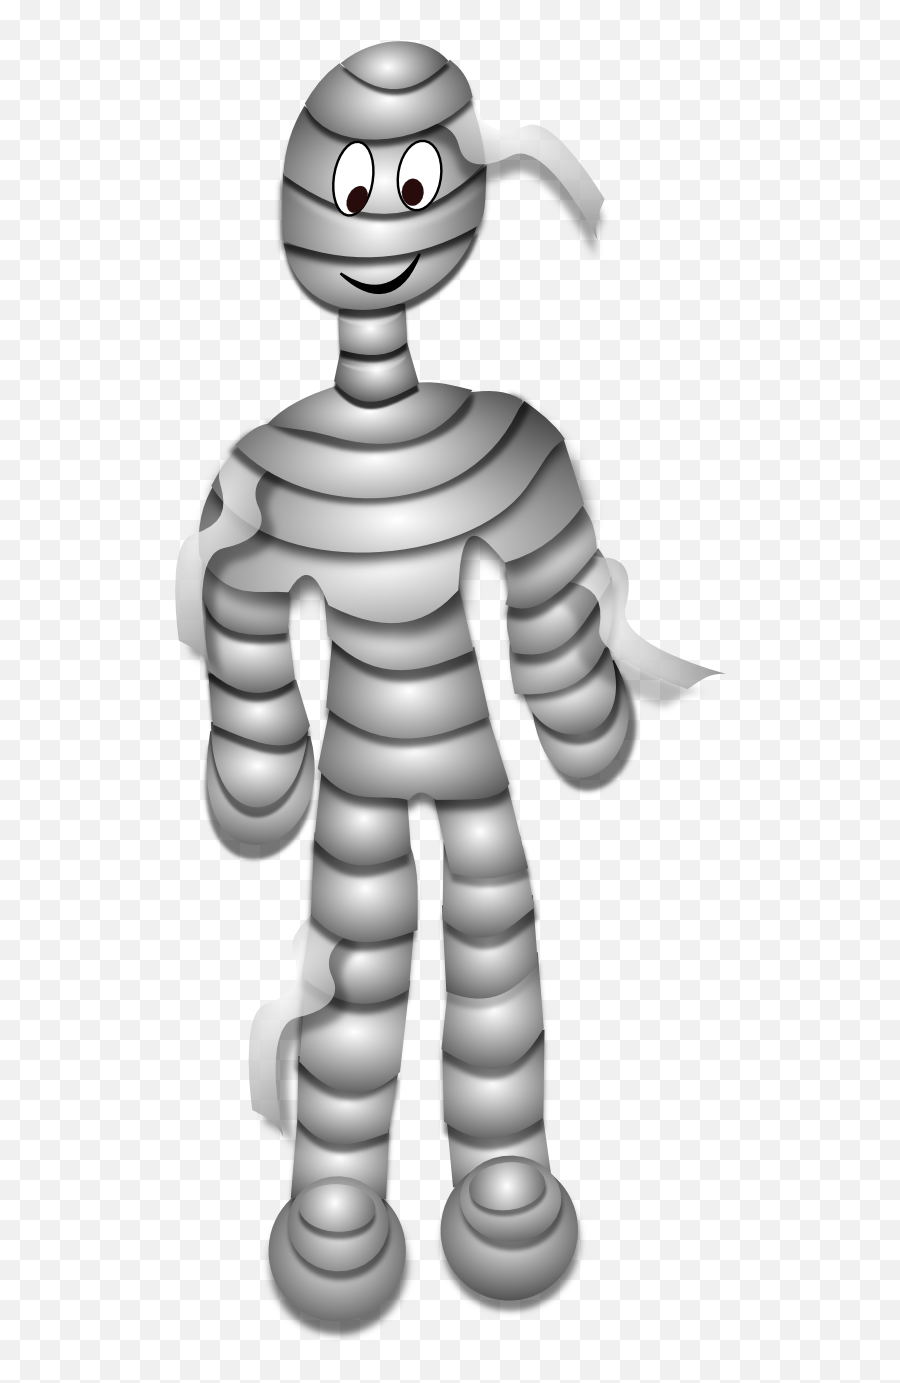 Download Free Cartoon Mummy Png Image - Mummy Pictures For Kids,Mummy Png